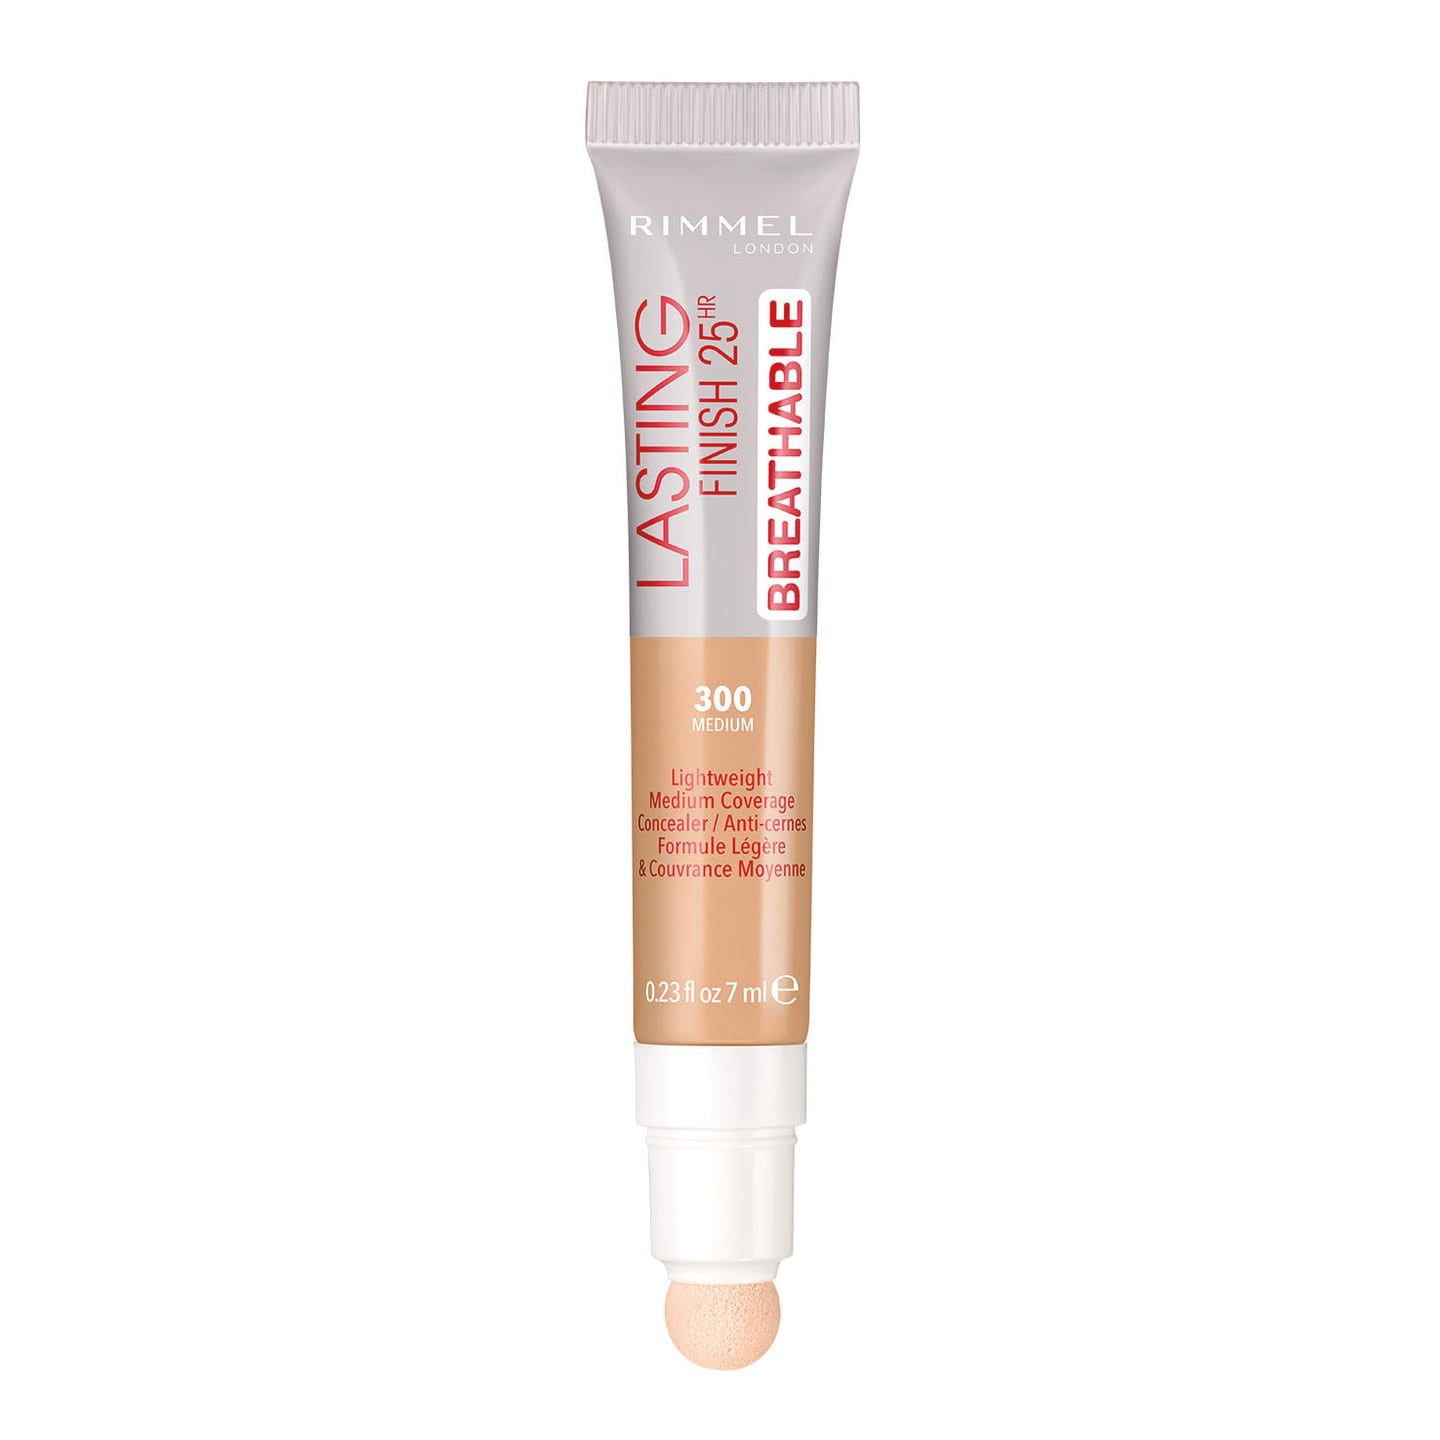 Lasting Finish Breathable Concealer